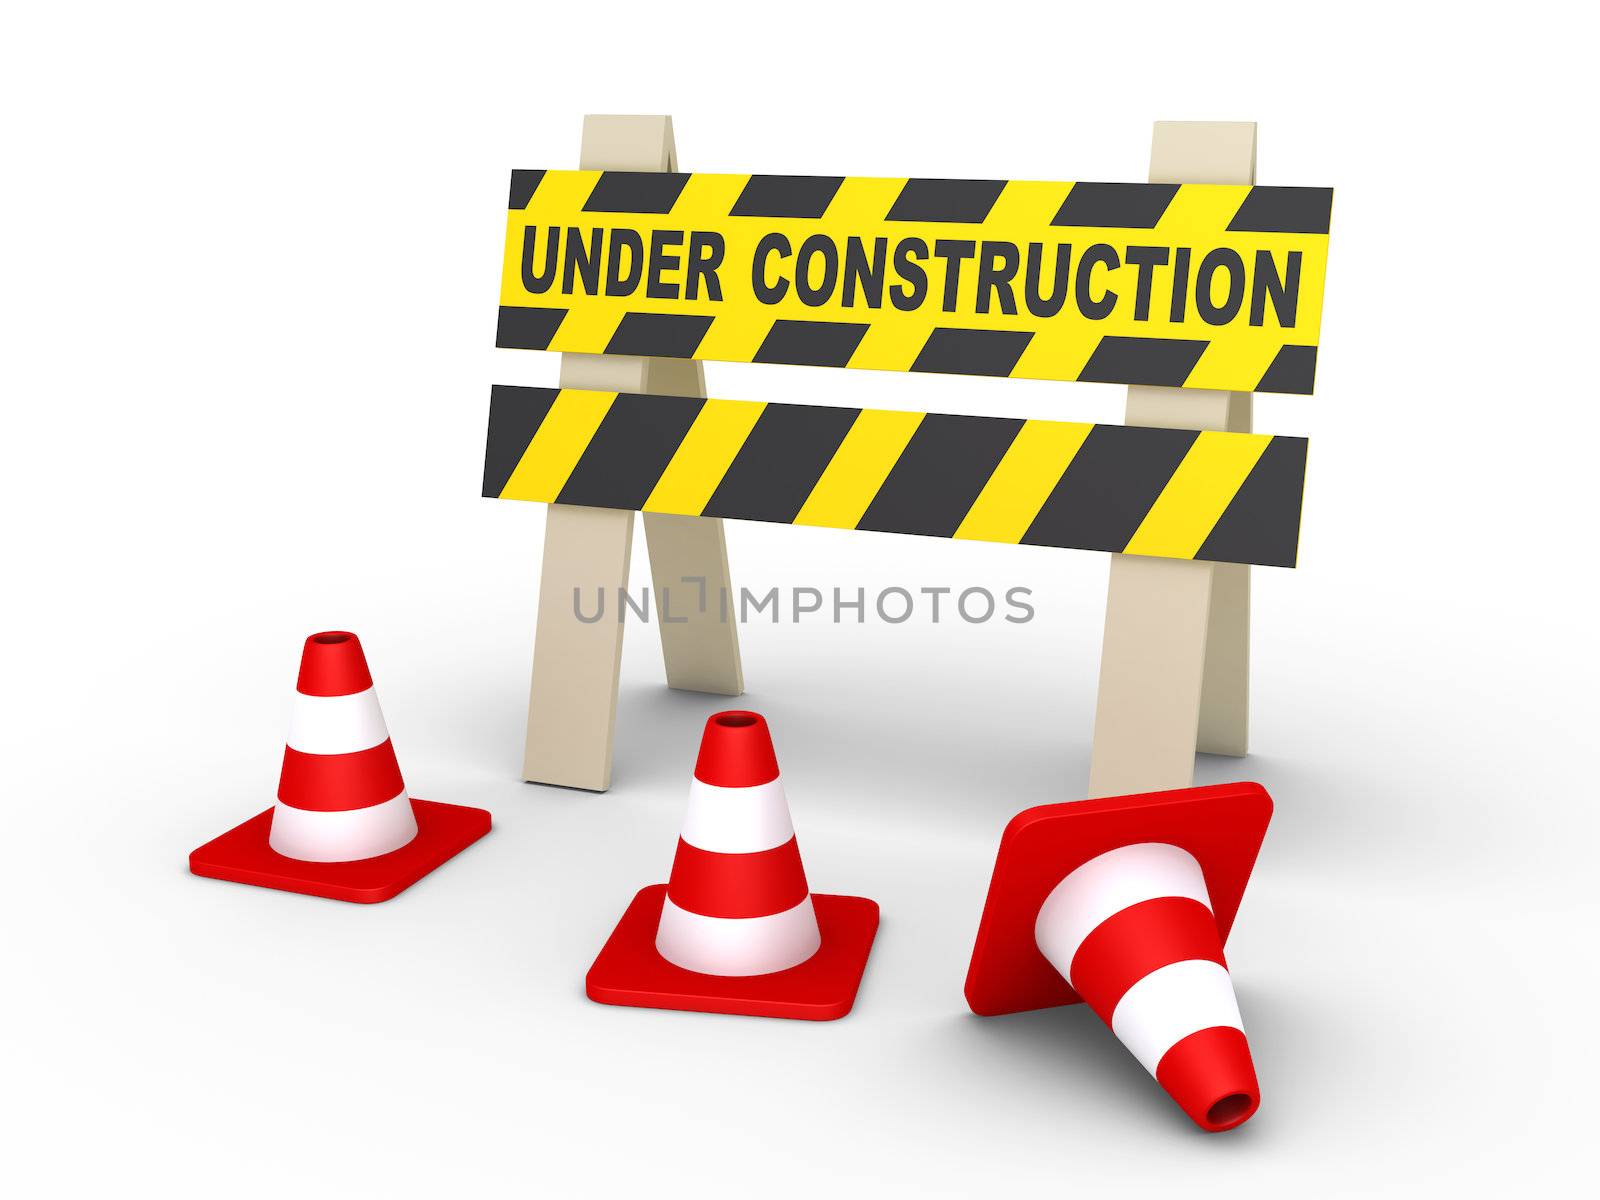 Under construction sign and cones by 6kor3dos